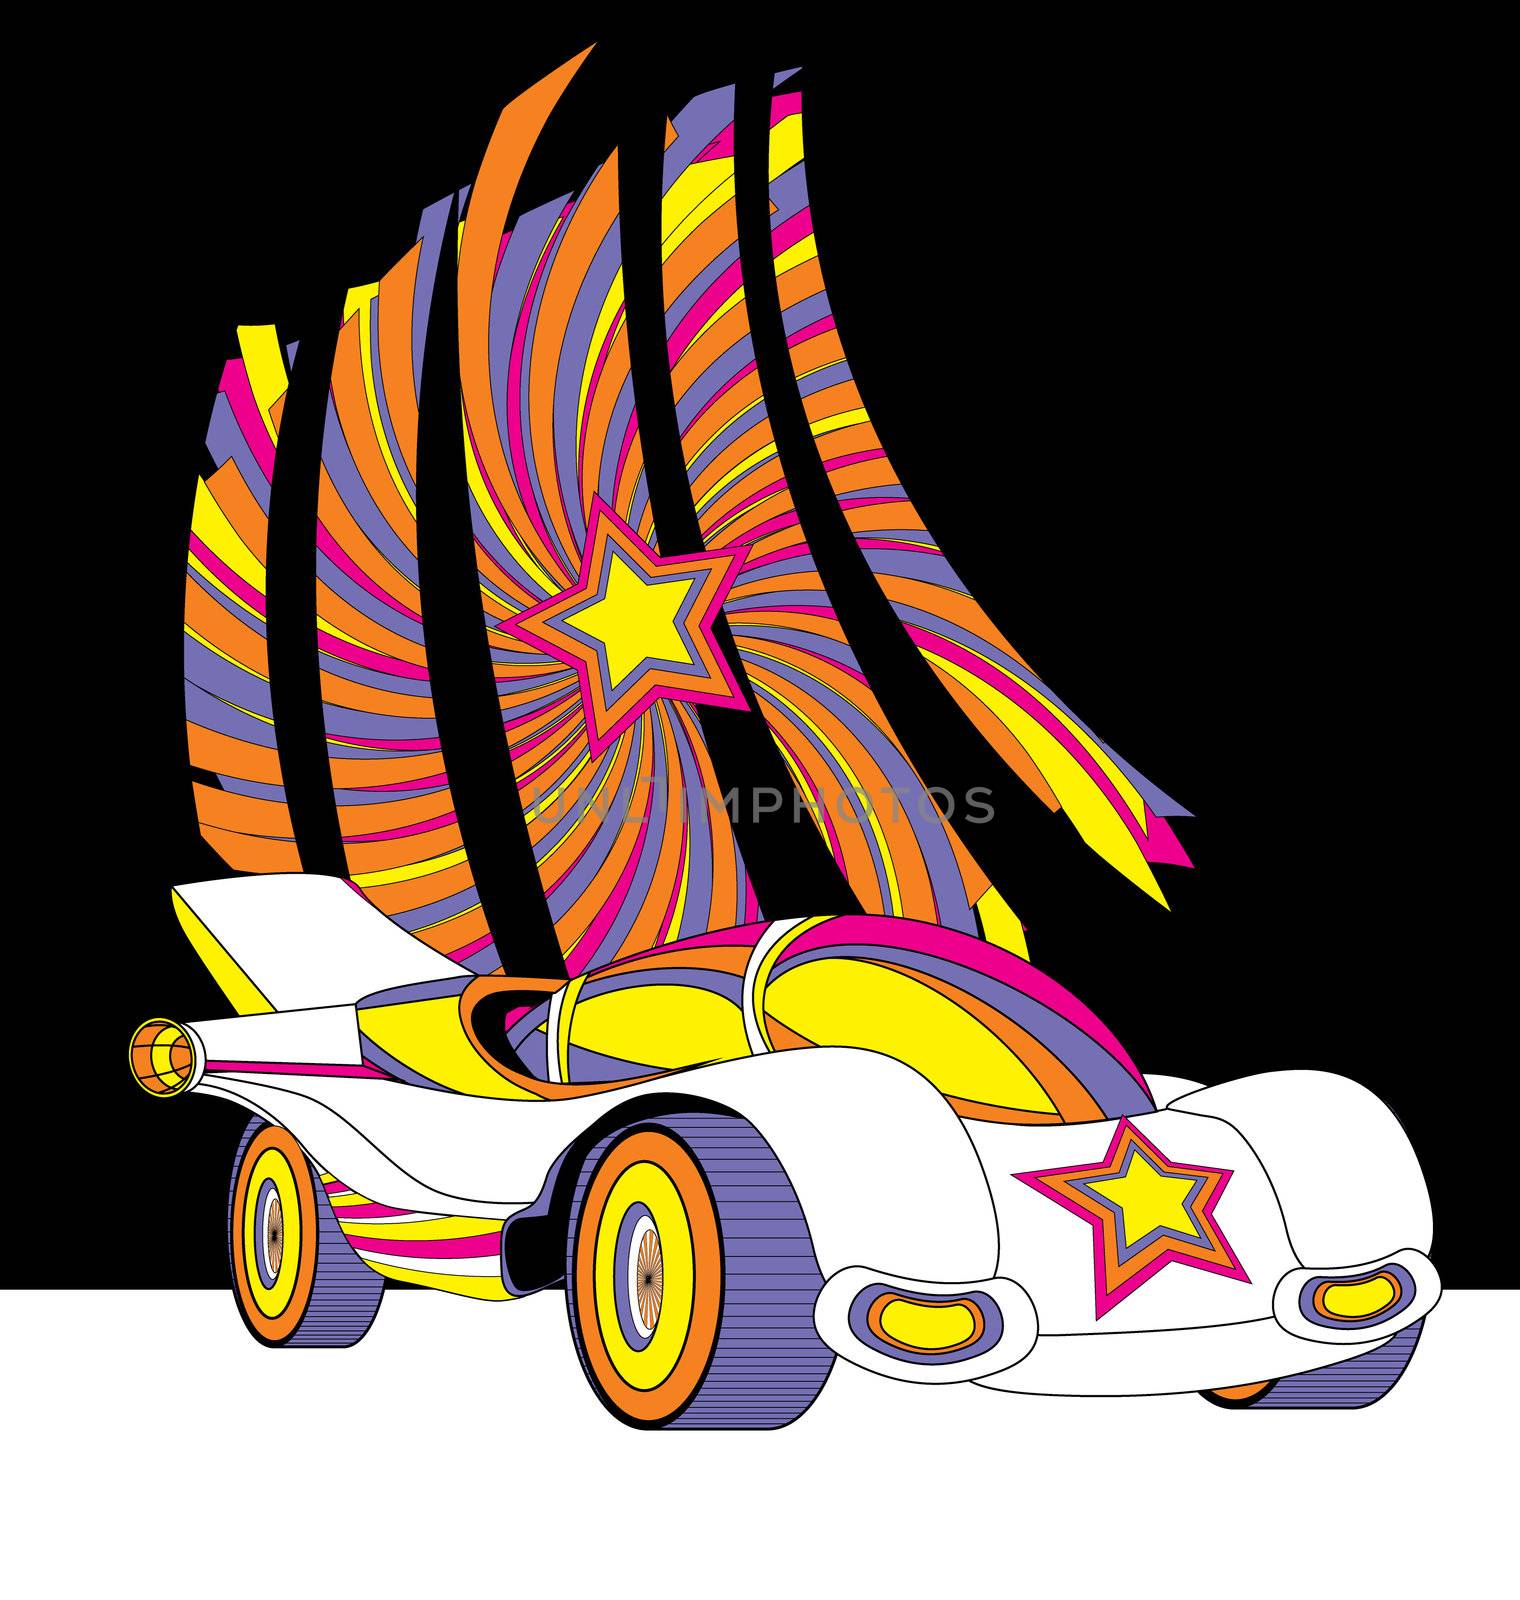 vector style race car with star decor colorful futuristic illust by CherJu